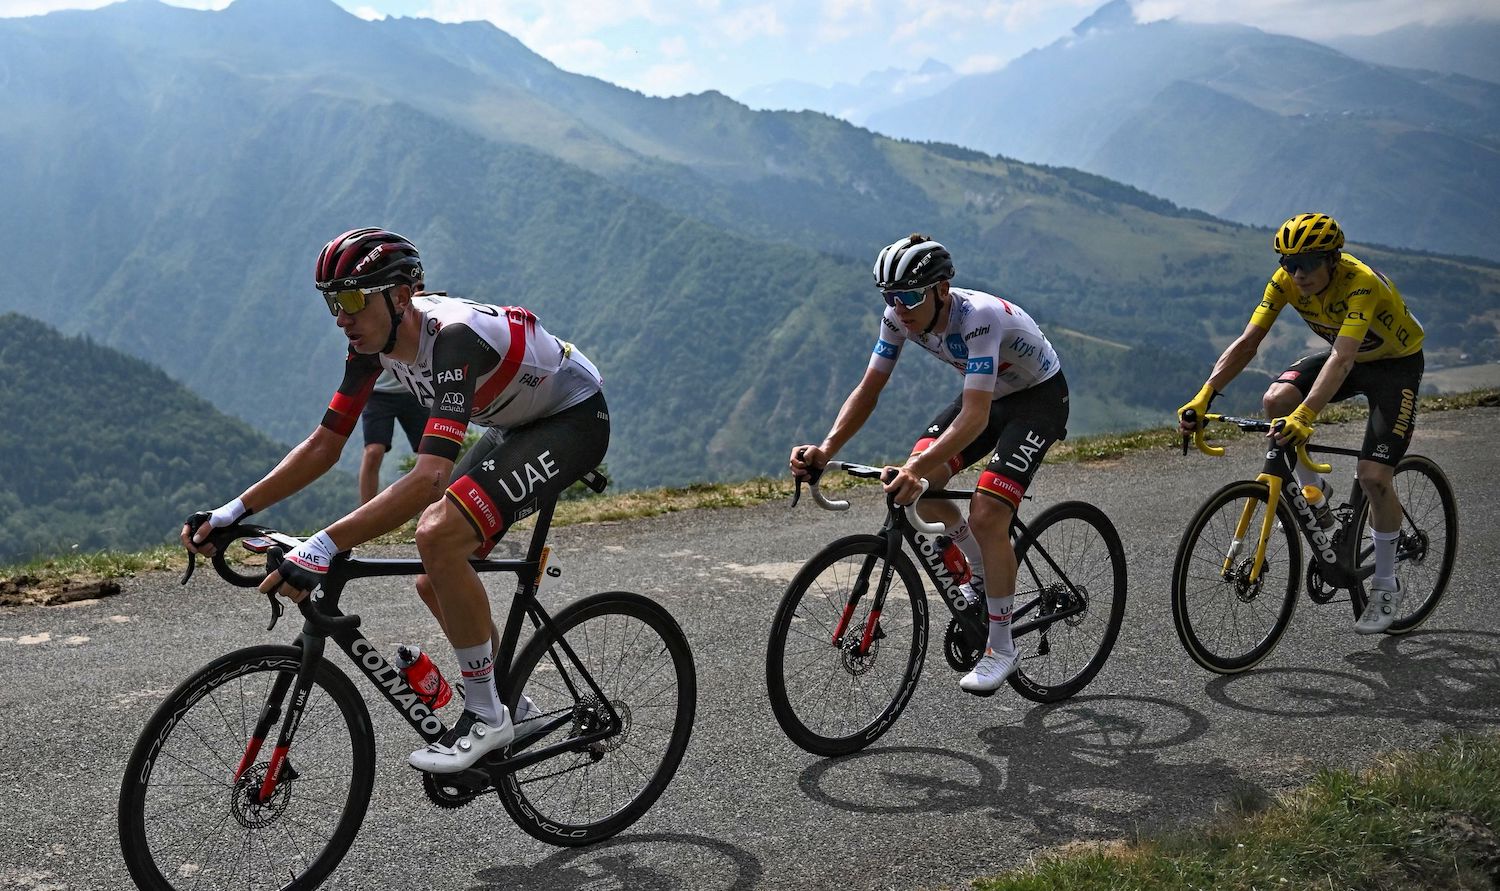 UAE Team Emirates team's American rider Brandon McNulty (L), UAE Team Emirates team's Slovenian rider Tadej Pogacar (C) wearing the best young rider's white jersey, and Jumbo-Visma team's Danish rider Jonas Vingegaard (R) wearing the overall leader's yellow jersey cycle in the ascent of Peyragudes during the 17th stage of the 109th edition of the Tour de France cycling race, 129,7 km between Saint-Gaudens and Peyragudes, in southwestern France, on July 20, 2022. (Photo by Anne-Christine POUJOULAT / AFP) (Photo by ANNE-CHRISTINE POUJOULAT/AFP via Getty Images)